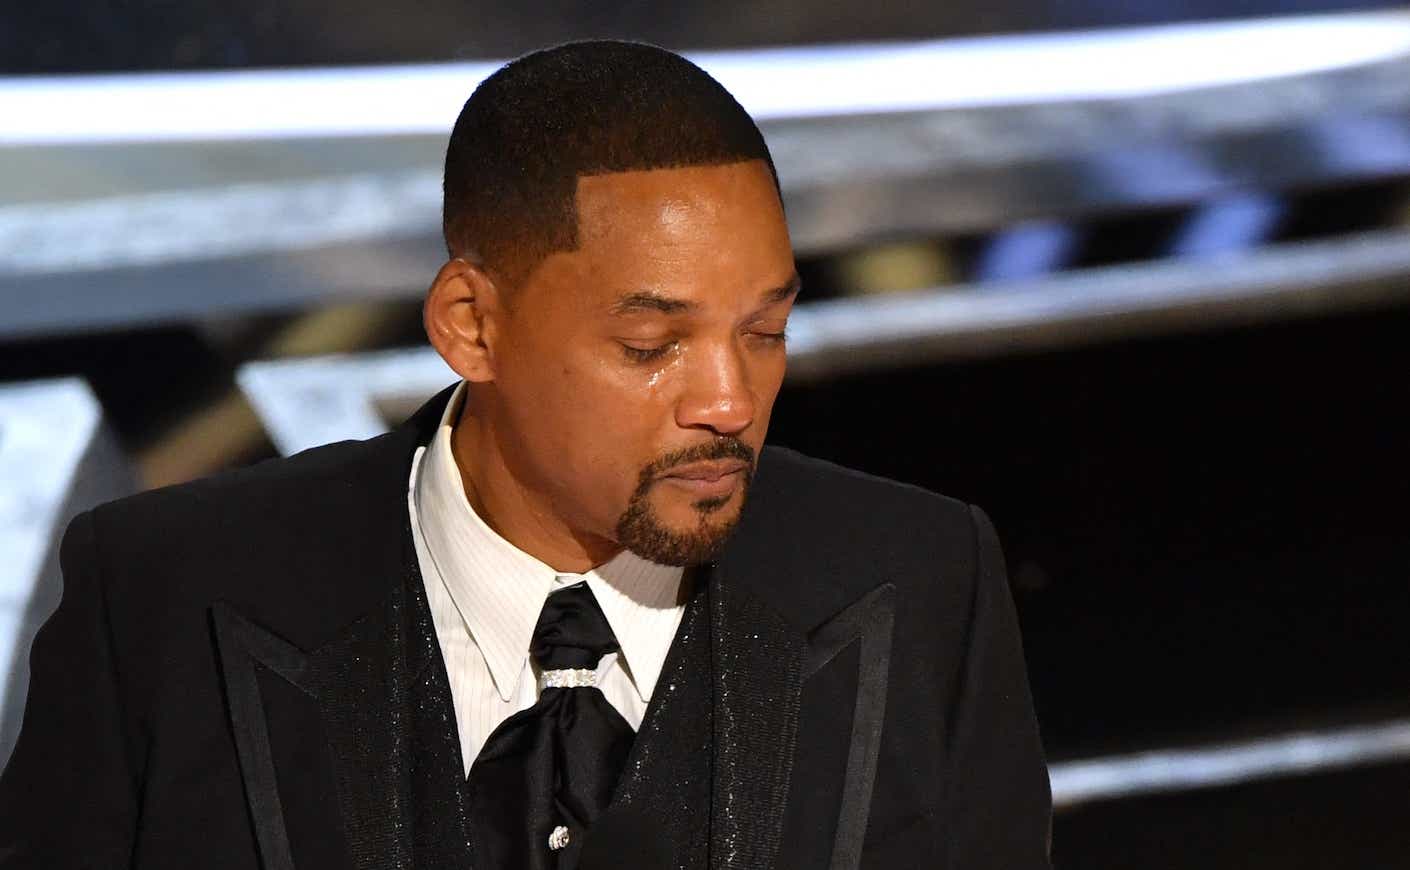 will smith crying at the Oscars 2022